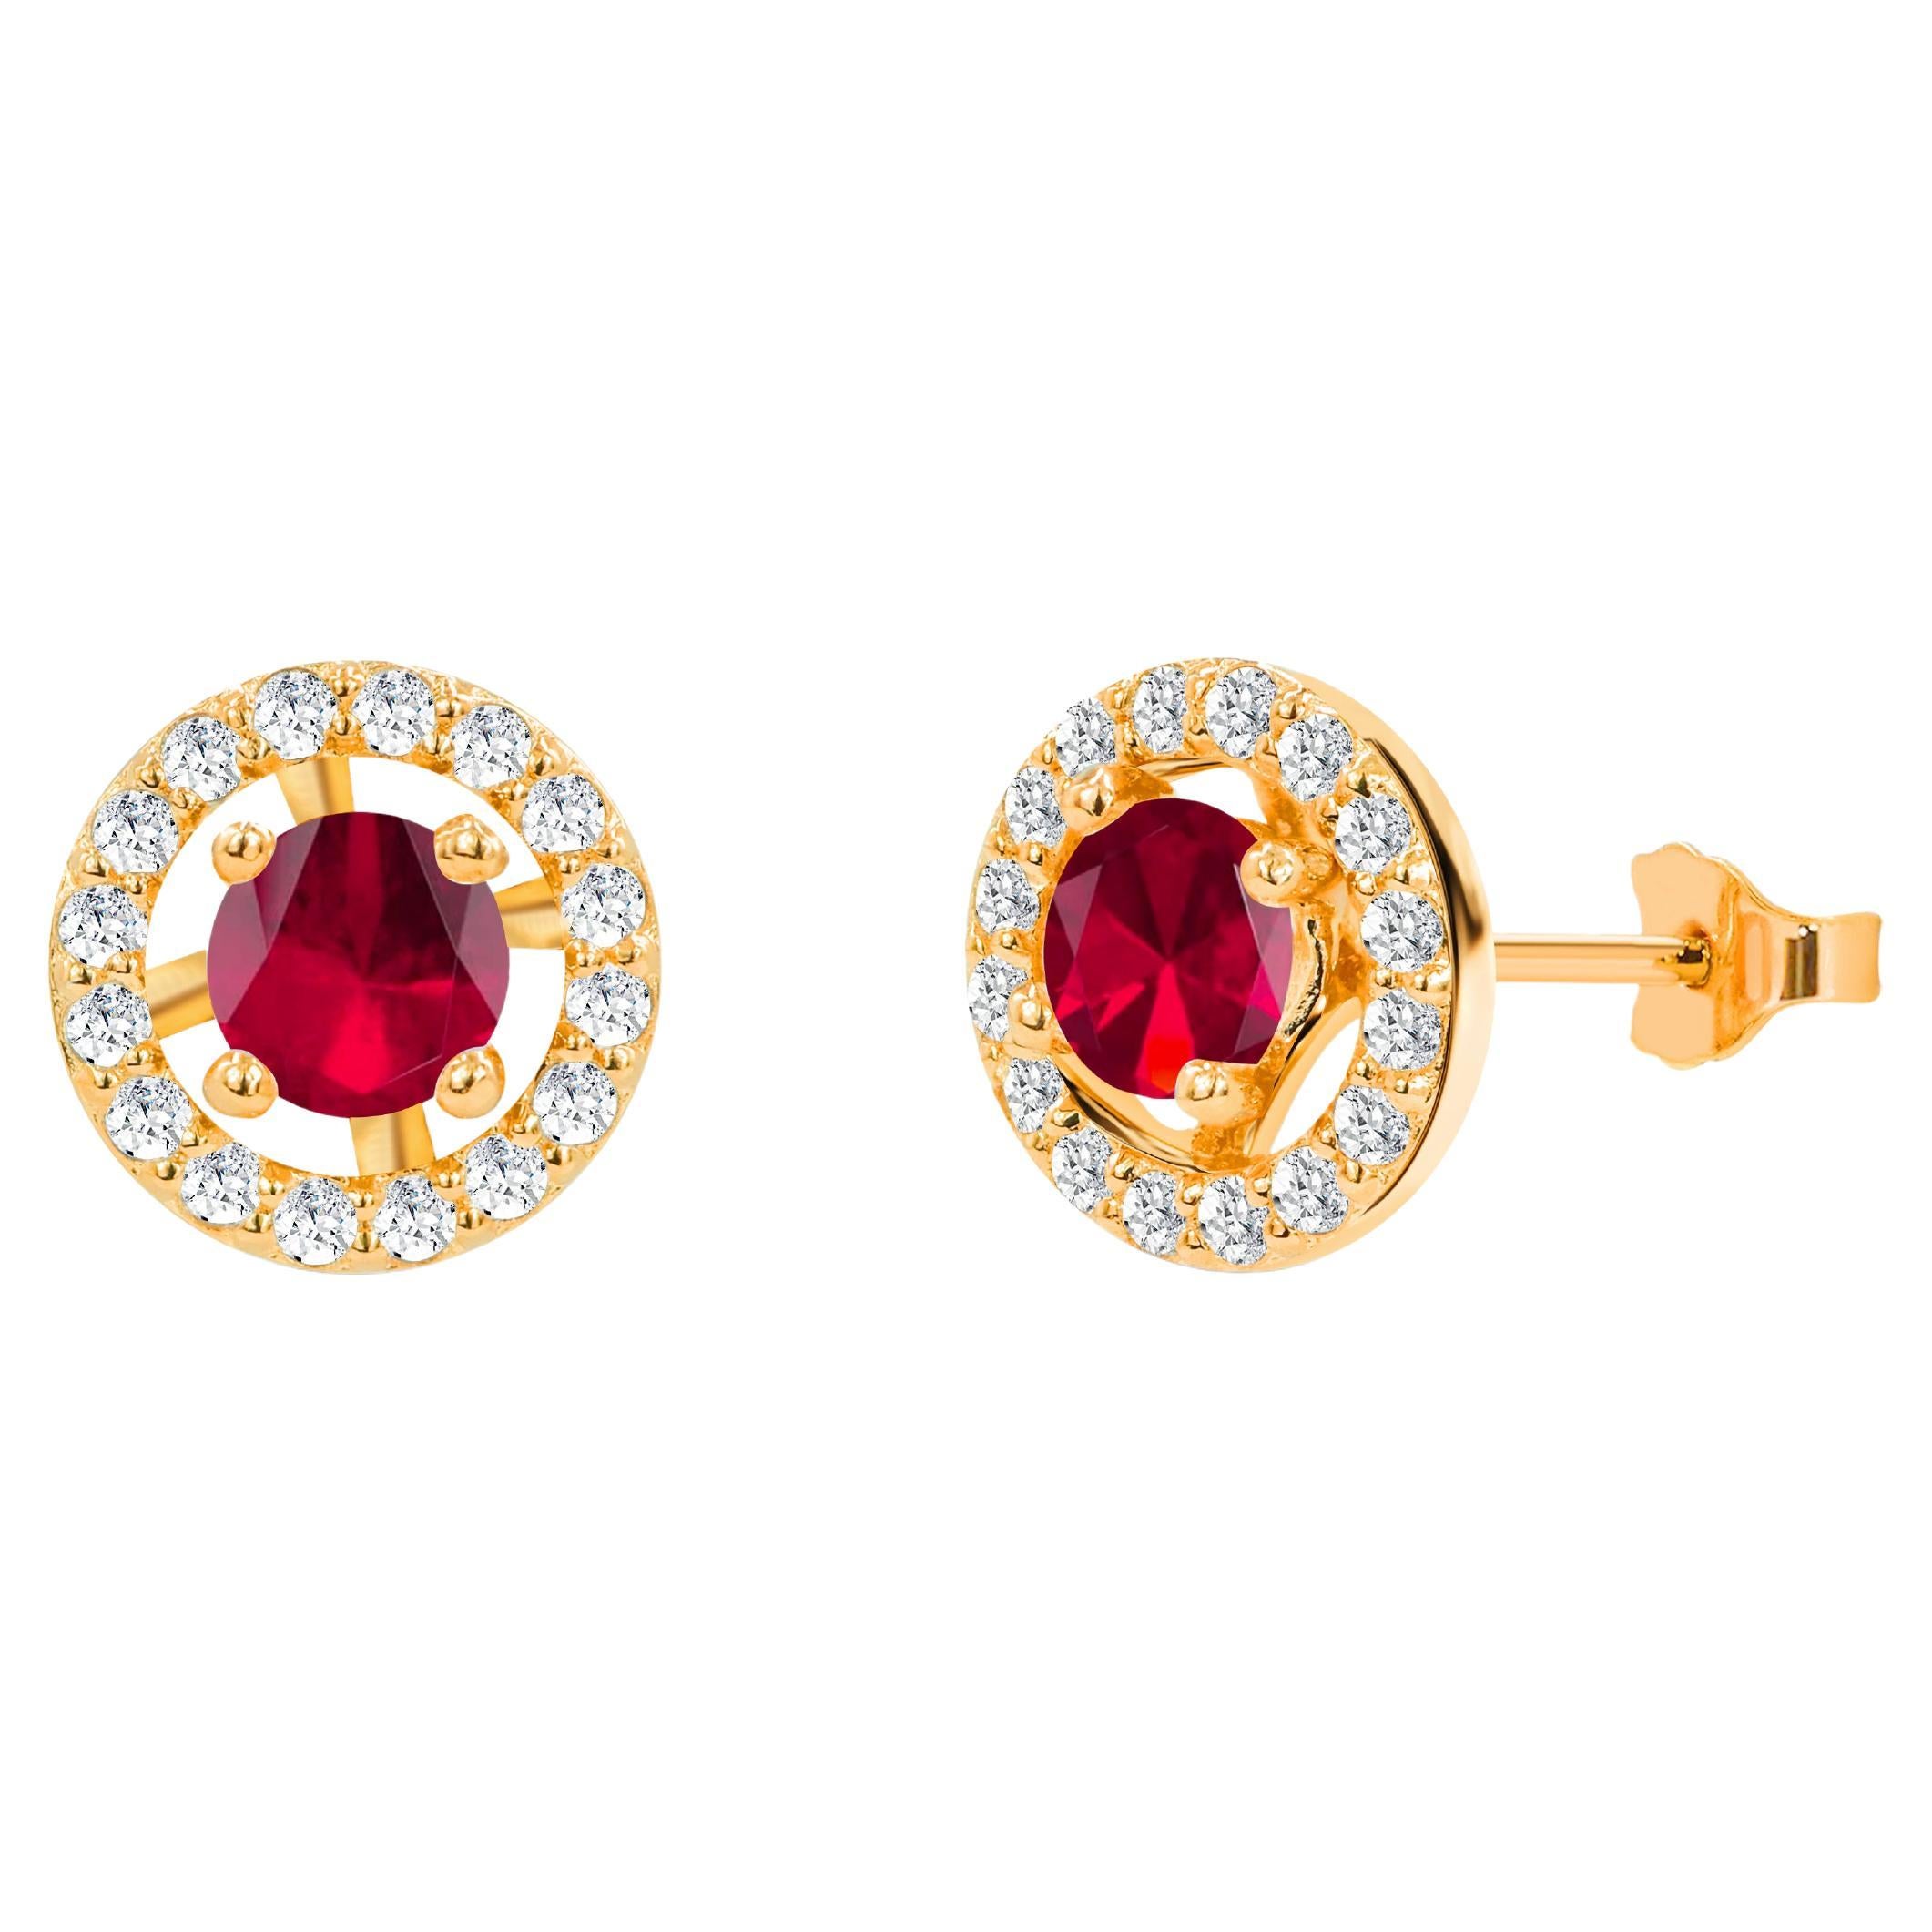 1.10ct Emerald, Ruby and Sapphire Halo Studs Earrings with Diamonds in 14k Gold For Sale